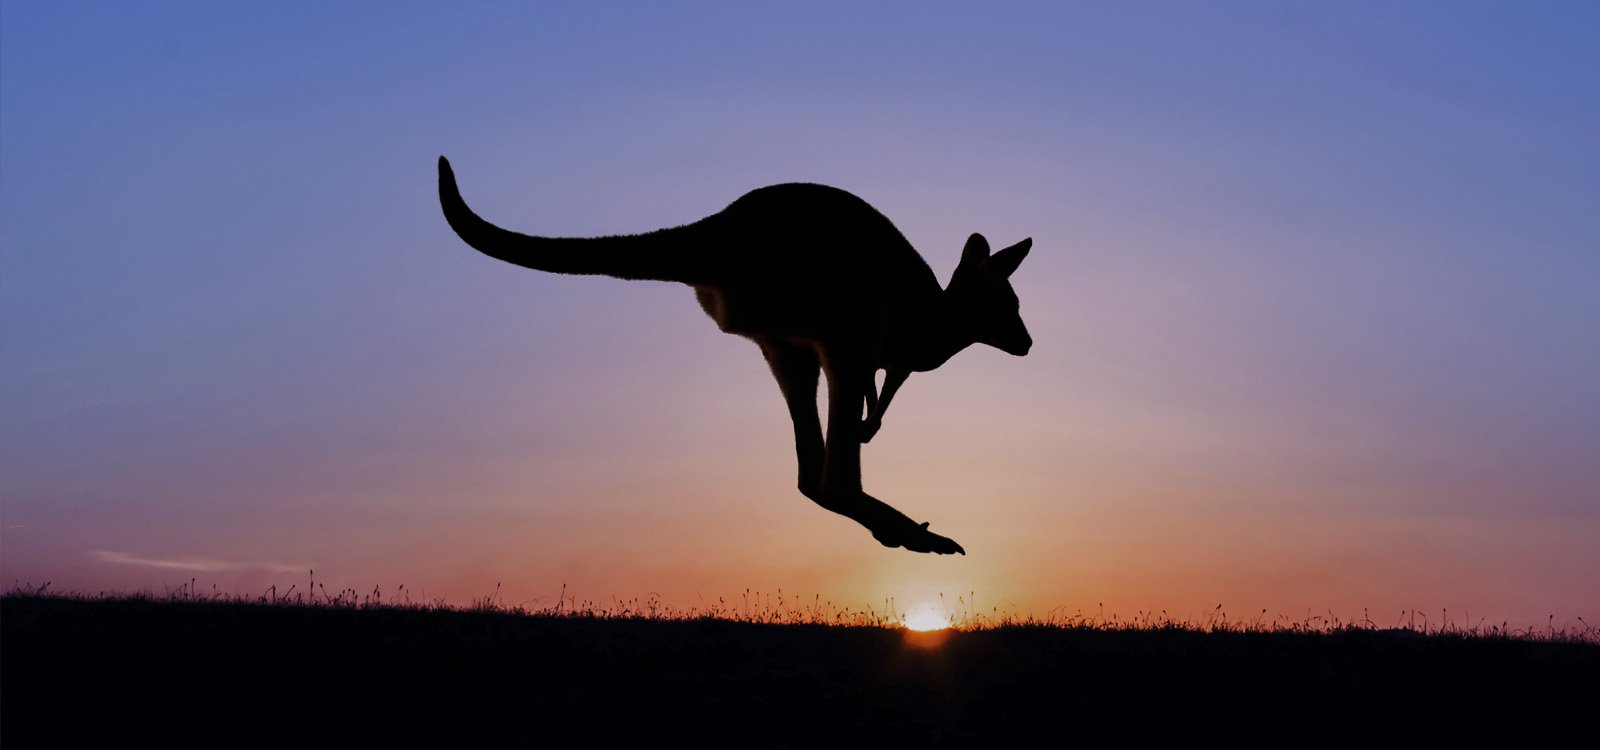 <p>Kangaroos were one of many animals brought in to entertain those hoping to get rich during the California Gold Rush.</p>
